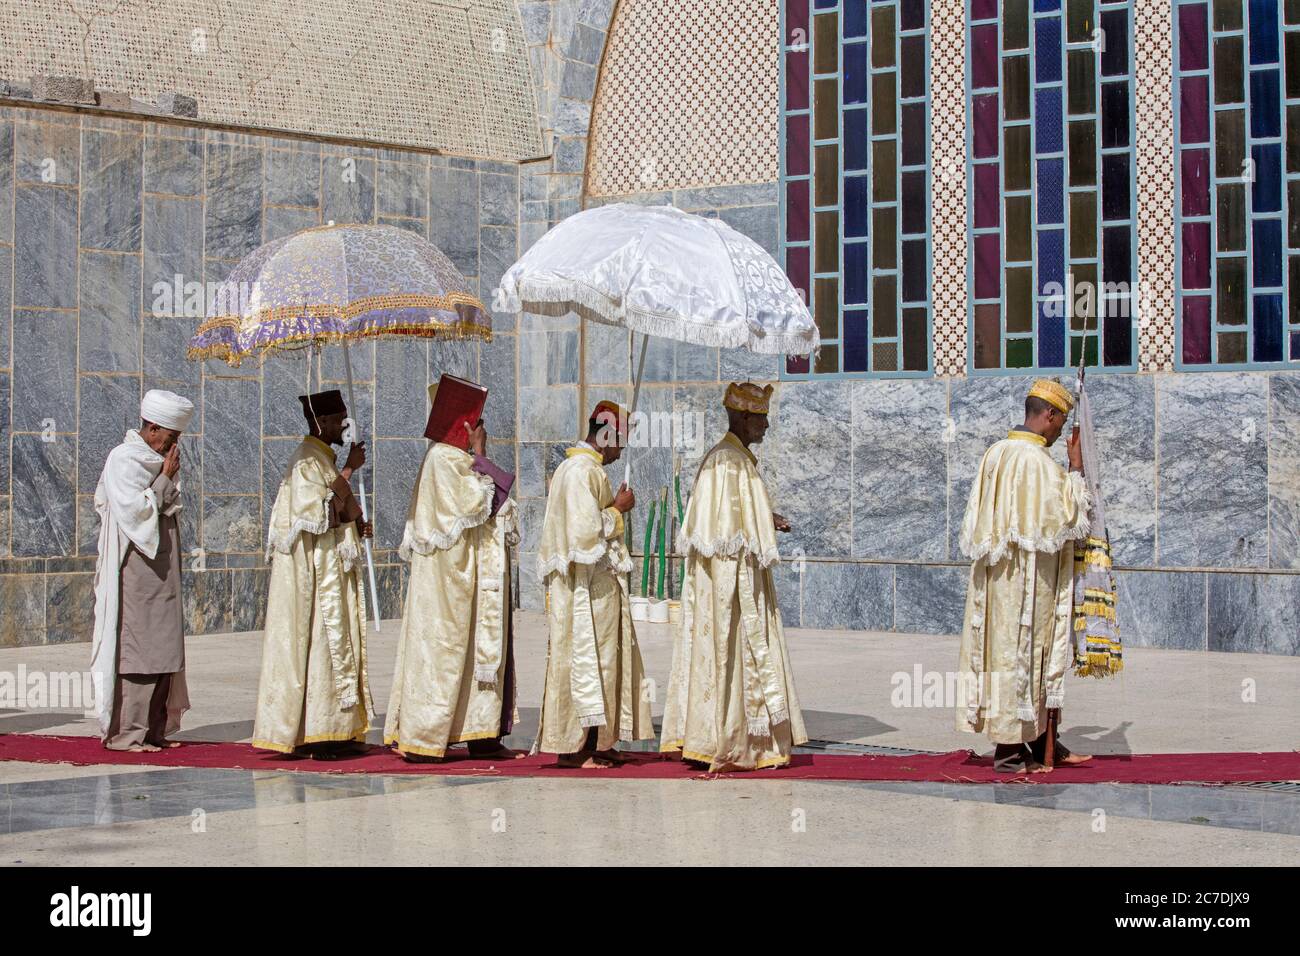 Orthodox priests with parasols during ceremony walking around the Church of Our Lady Mary of Zion, Axum / Aksum, Tigray Region, Ethiopia, Africa Stock Photo